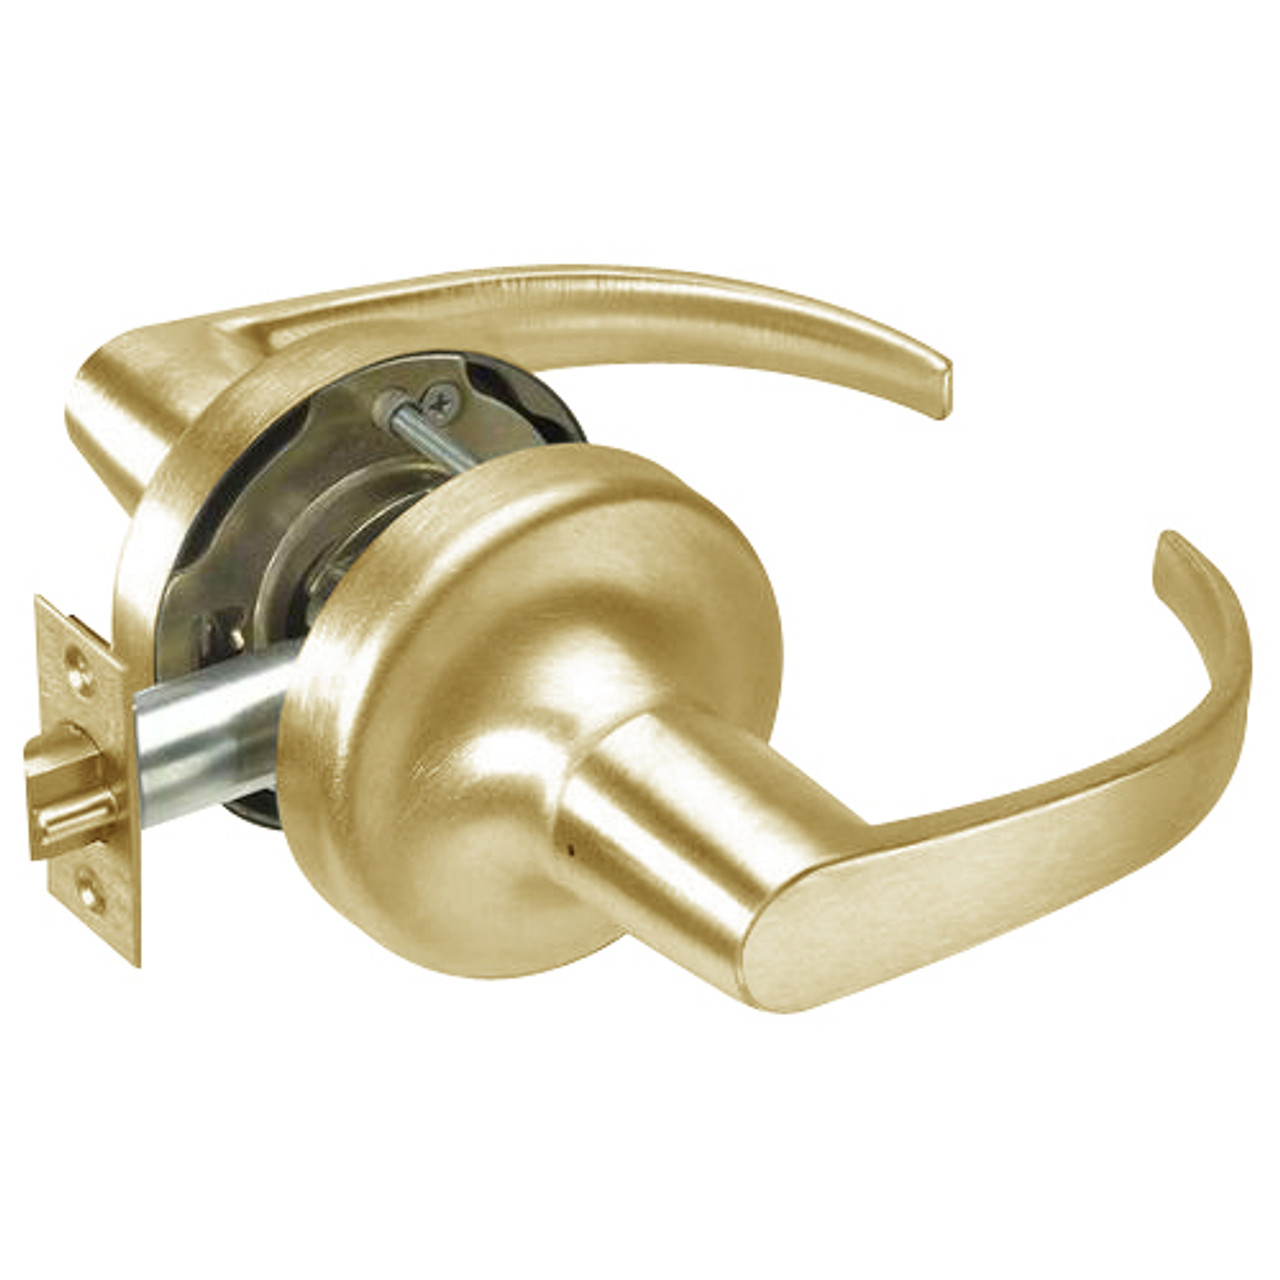 PB5401LN-606 Yale 5400LN Series Non-Keyed Passage or Closet Latchset Cylindrical Locks with Pacific Beach Lever in Satin Brass